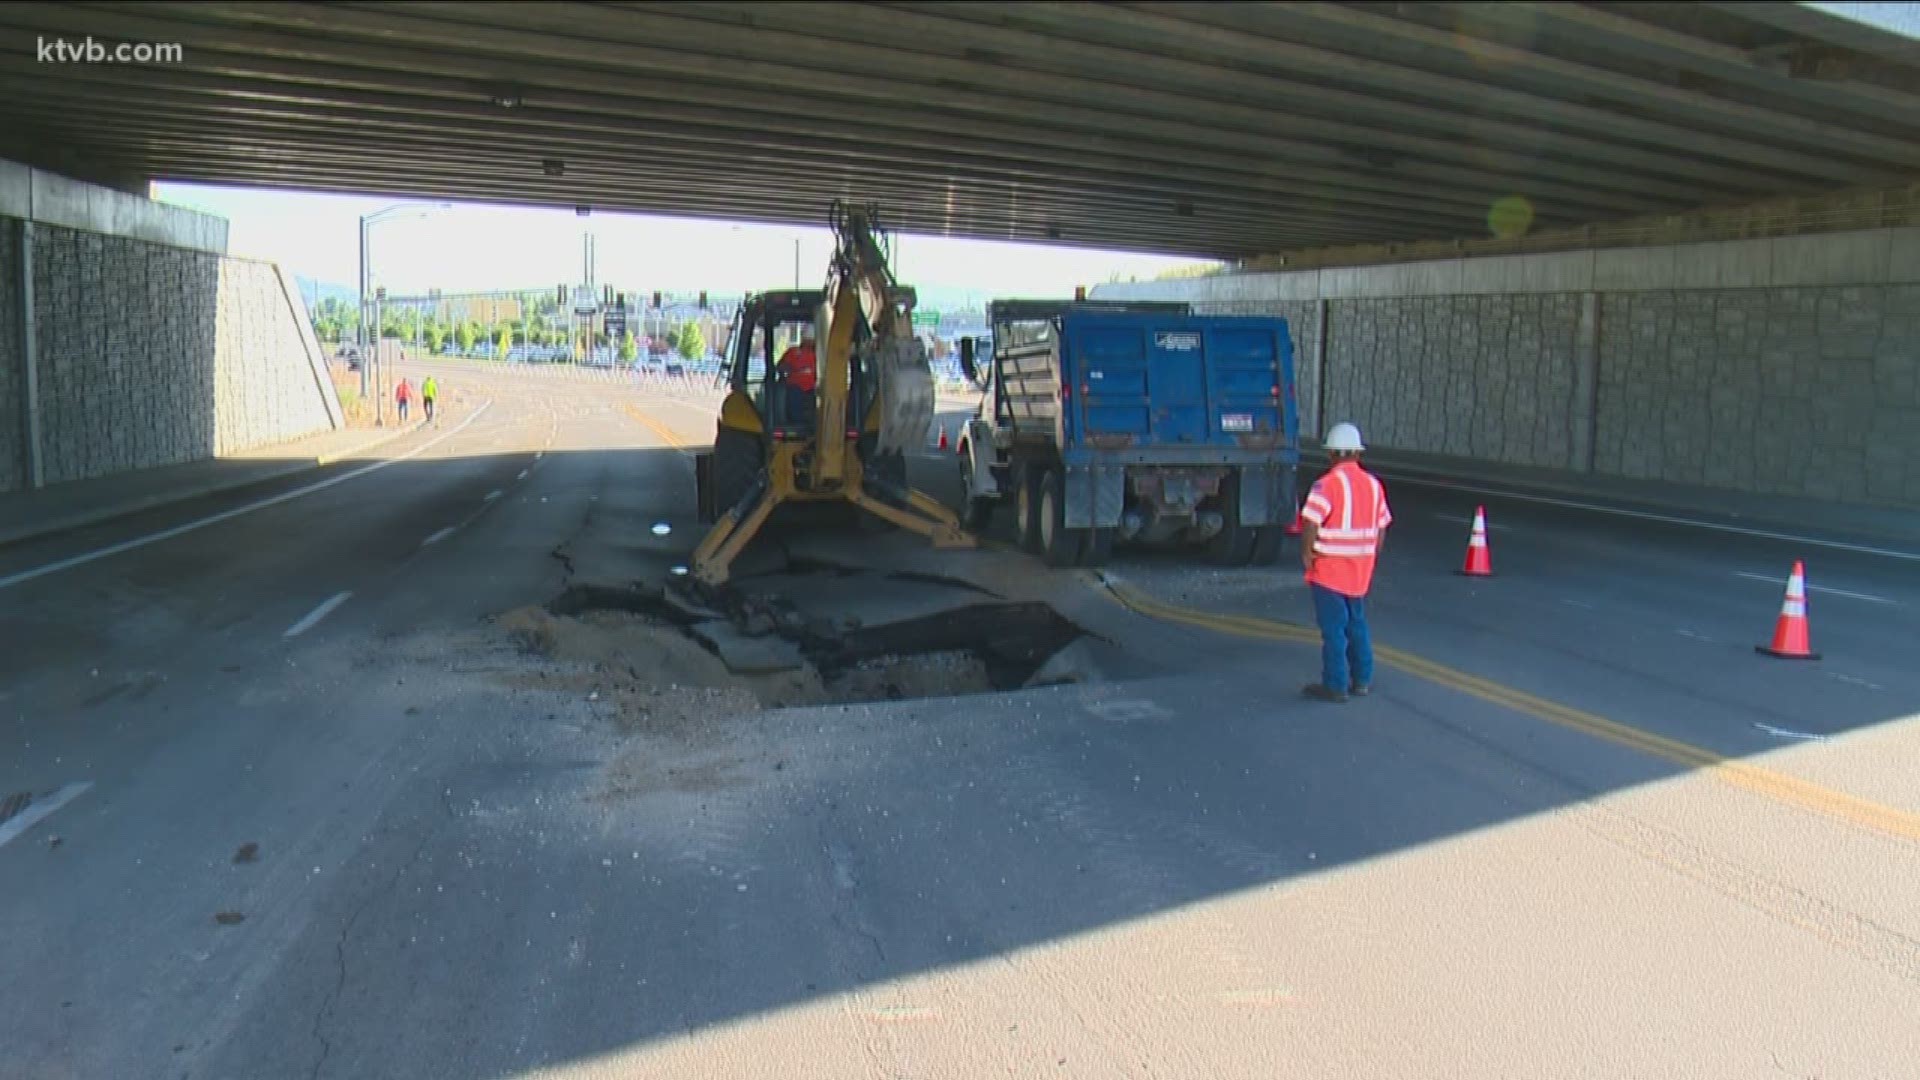 Officials say it will take until Monday to repair the damaged section of Garrity Boulevard.